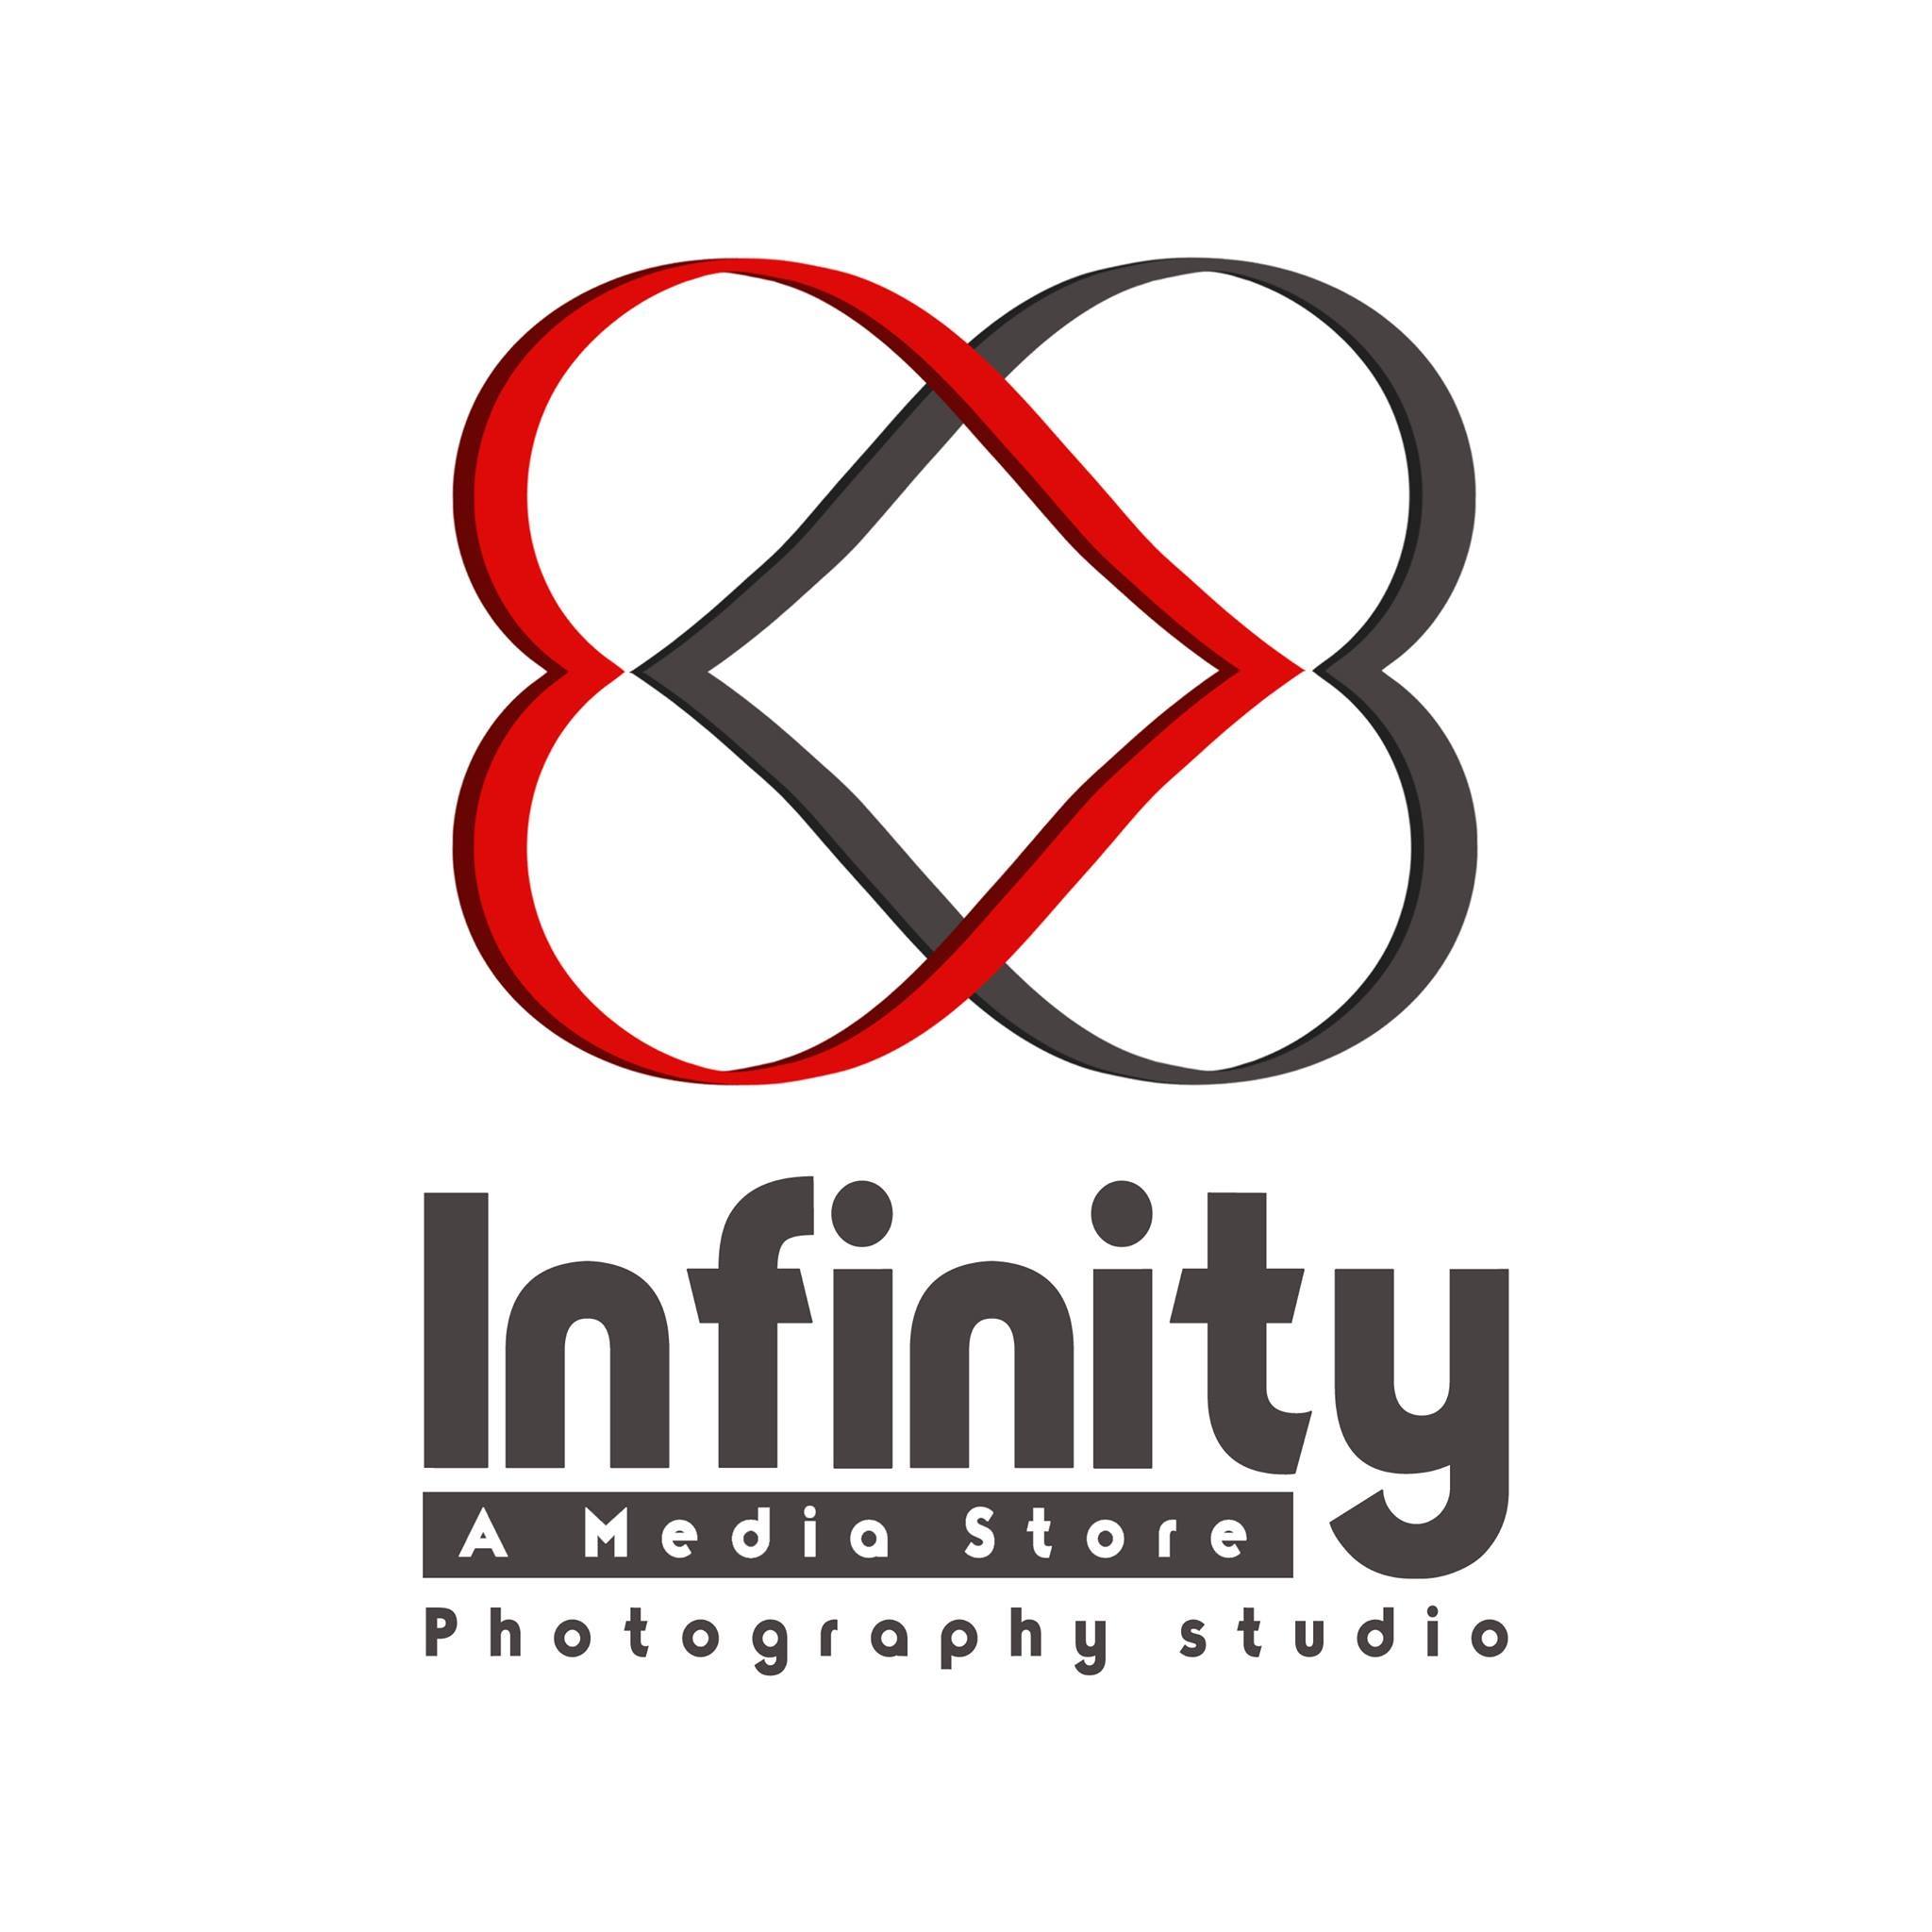 Infinity A Media Store Photography Studio|Photographer|Event Services